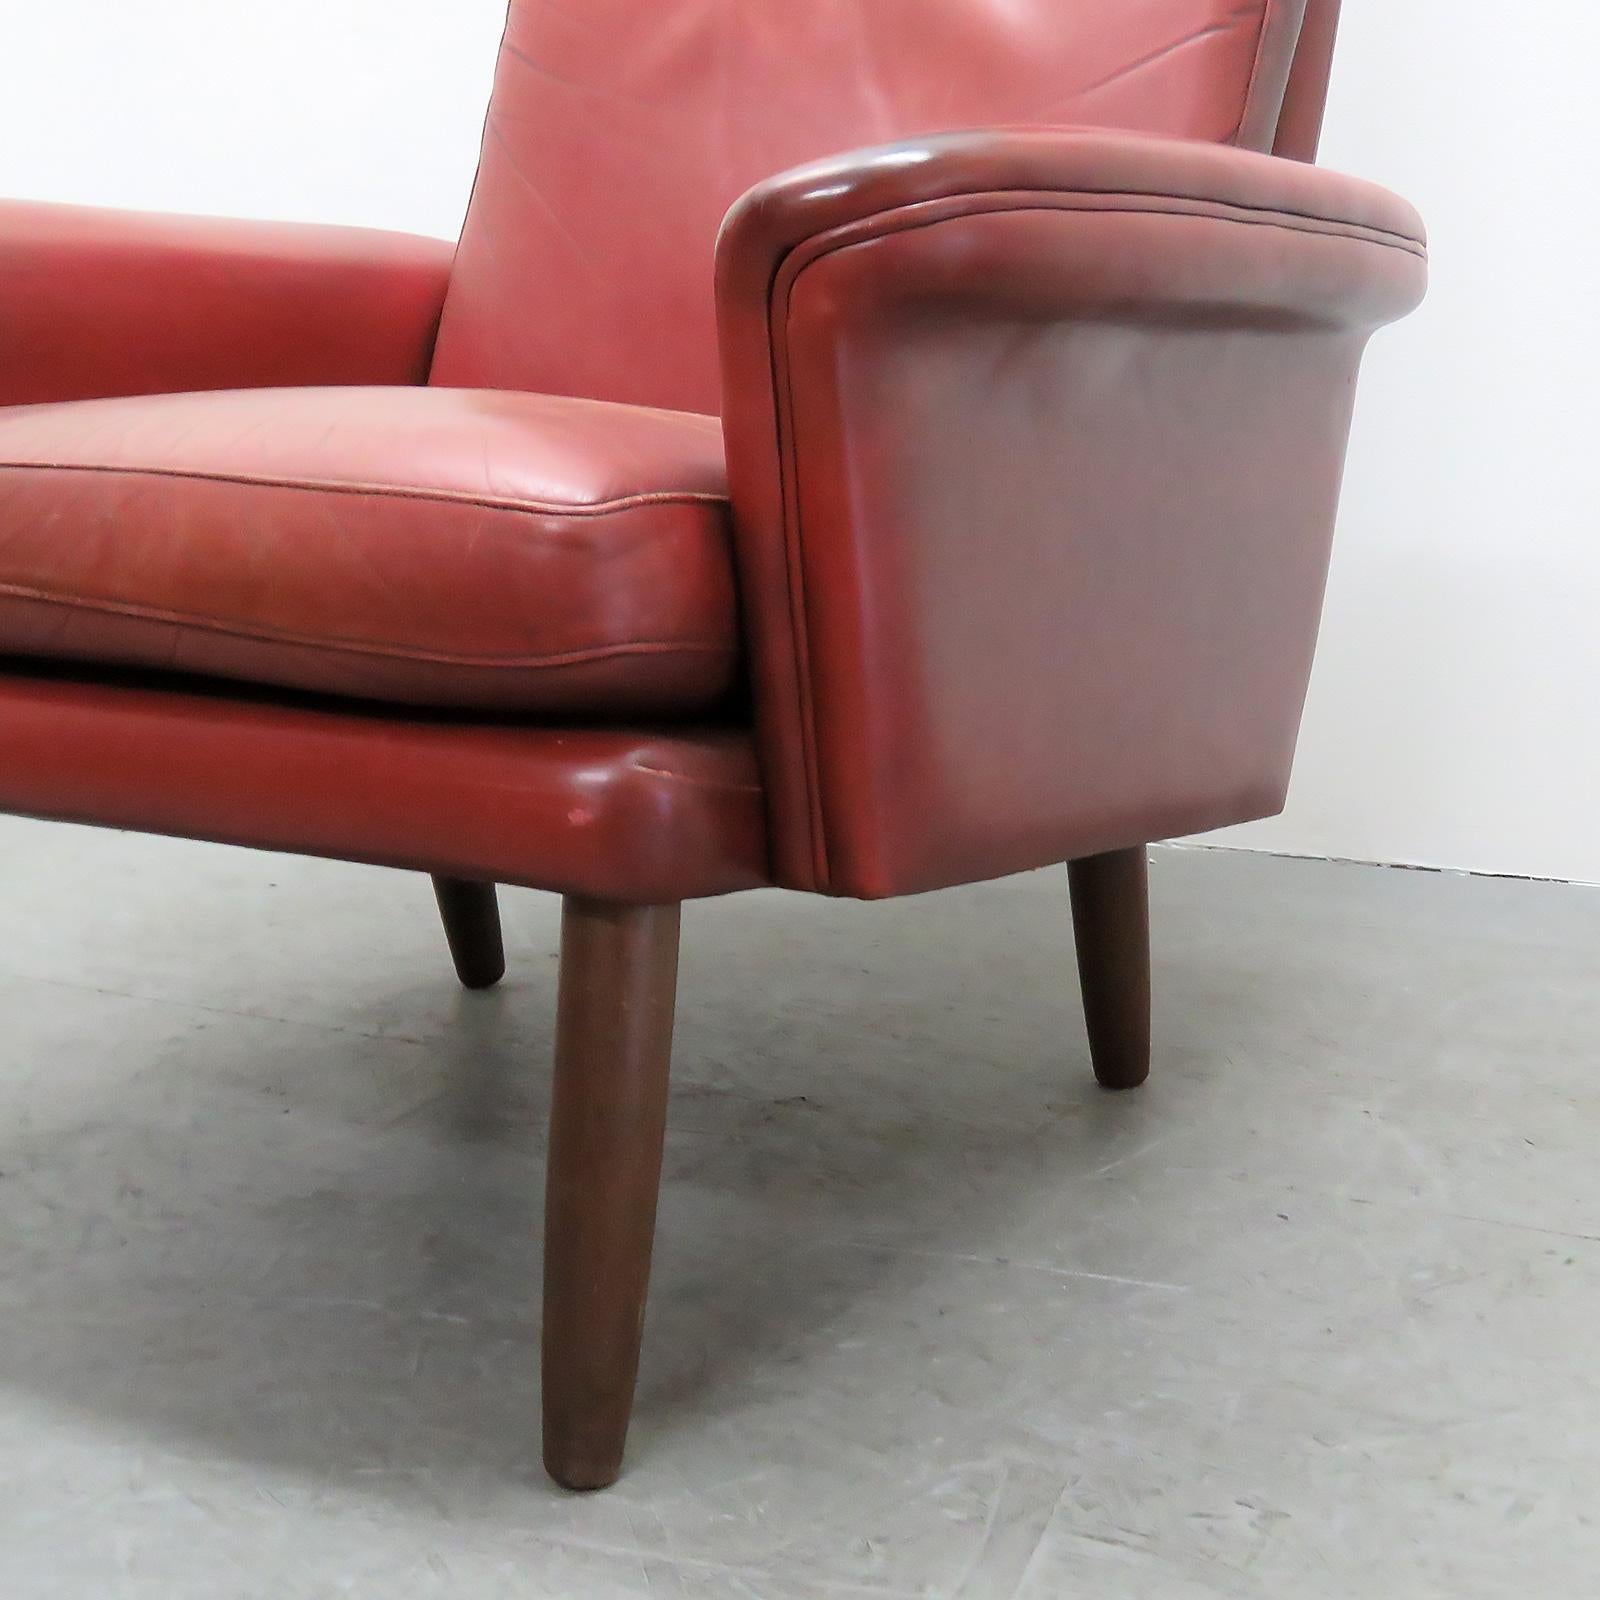 Danish High Back Leather Lounge Chair, 1960 For Sale 4